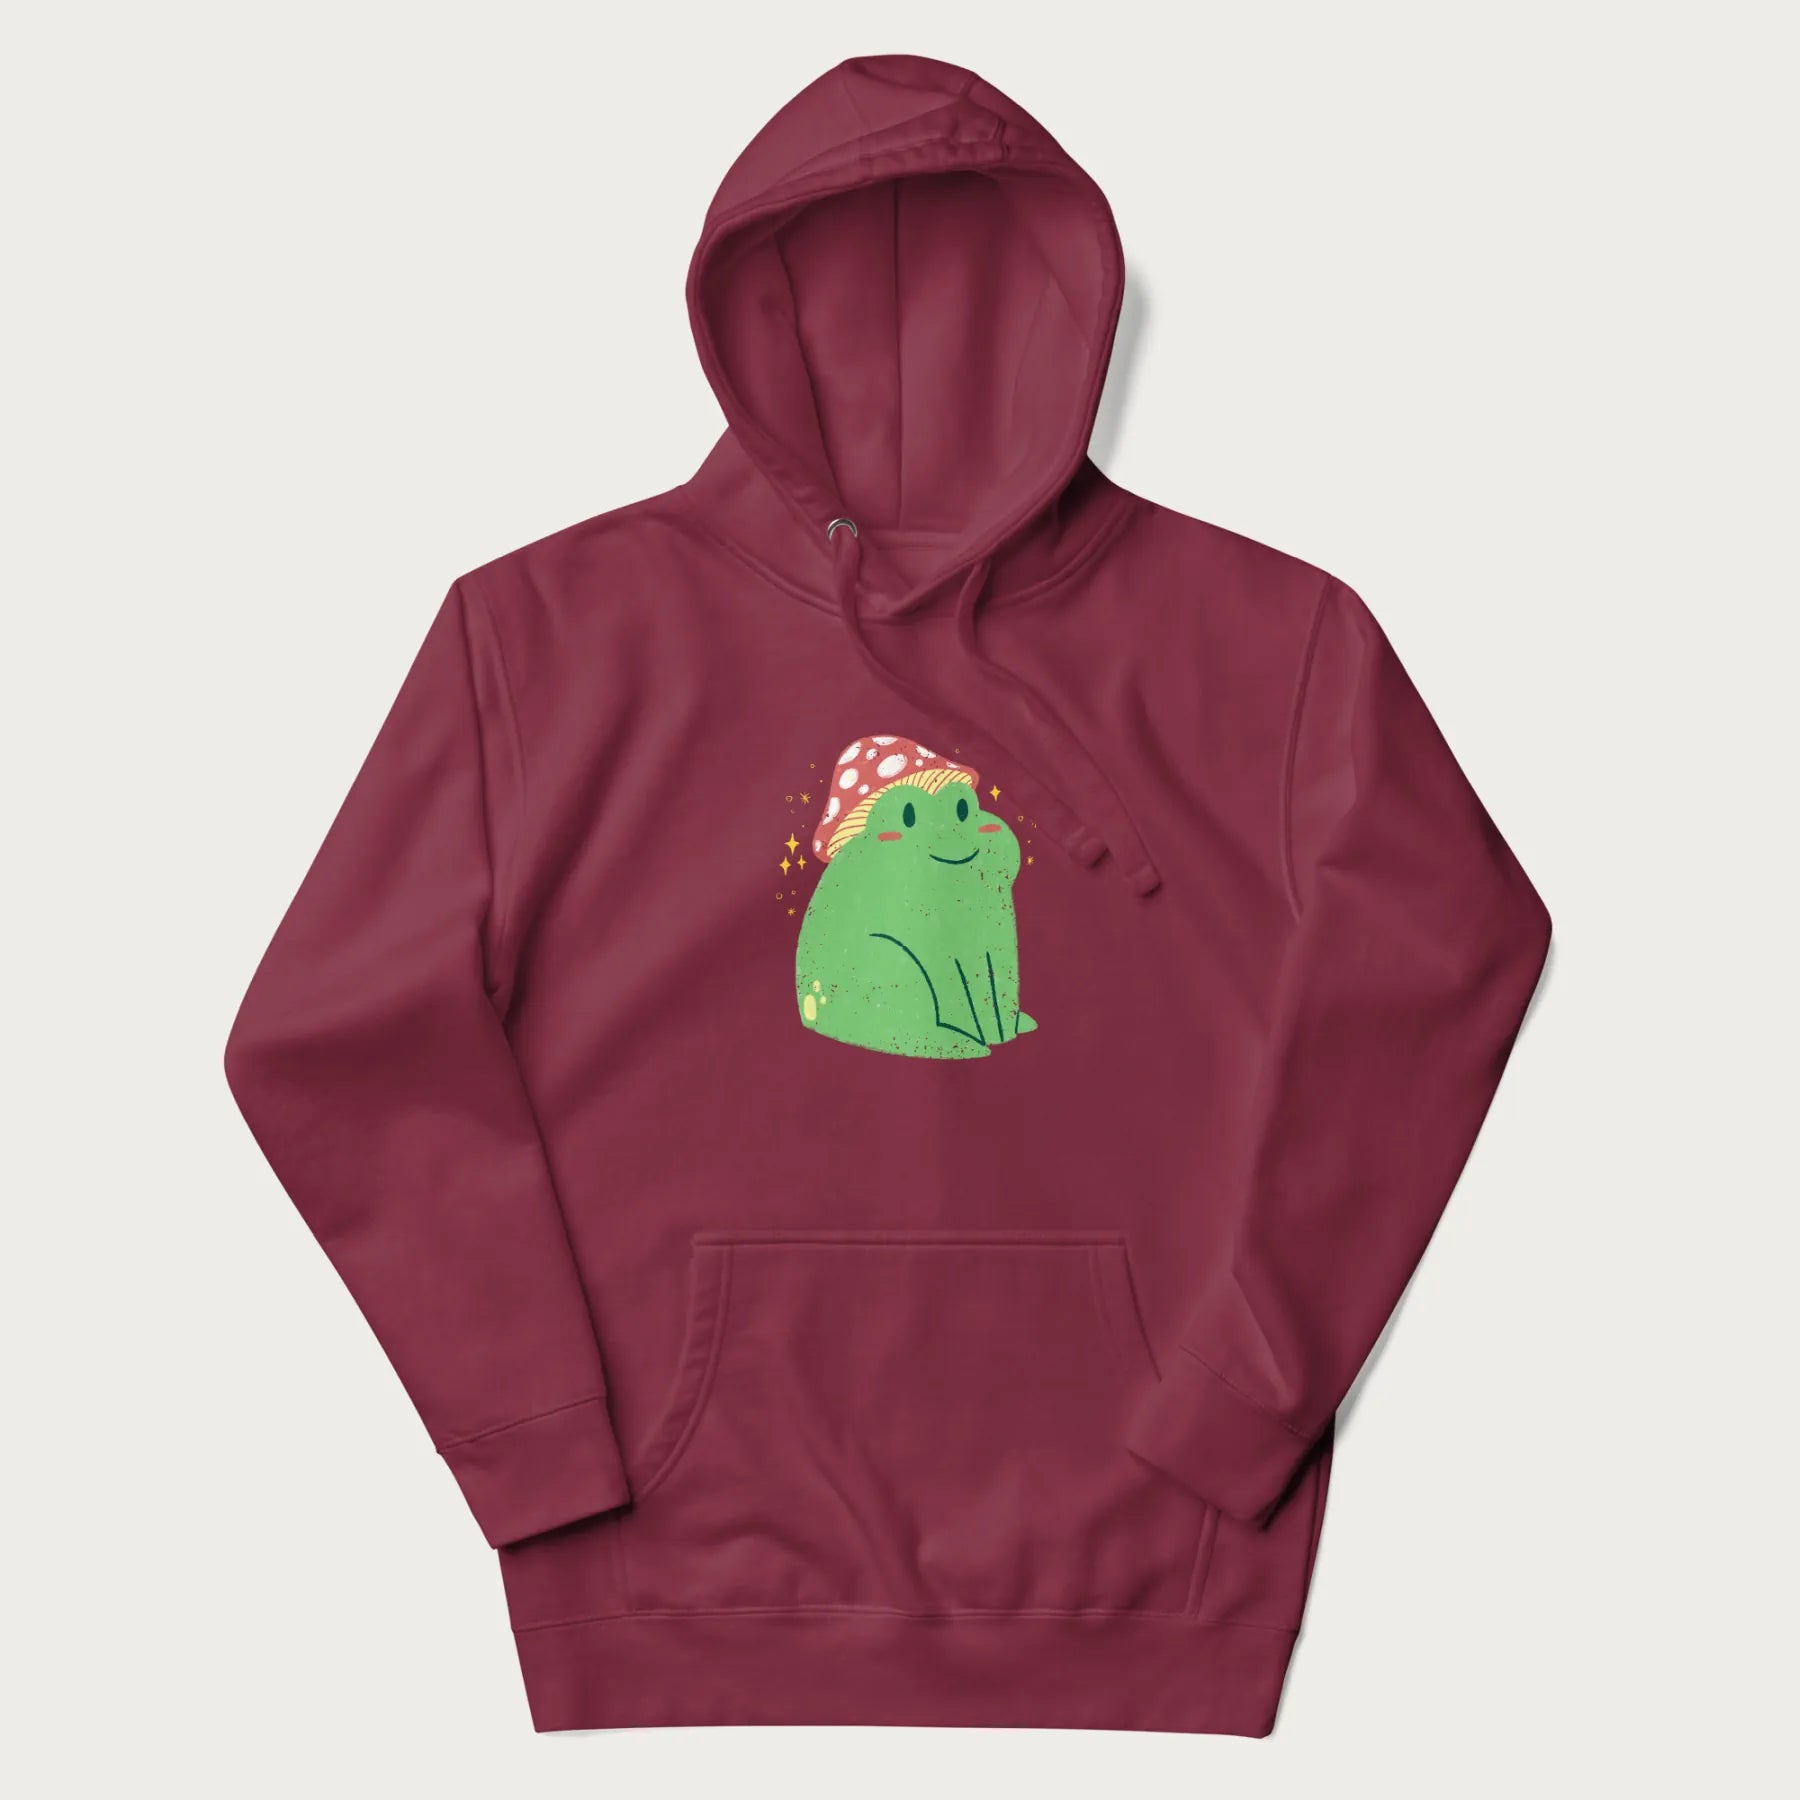 Maroon hoodie with a graphic of a green frog wearing a mushroom cap surrounded by stars.